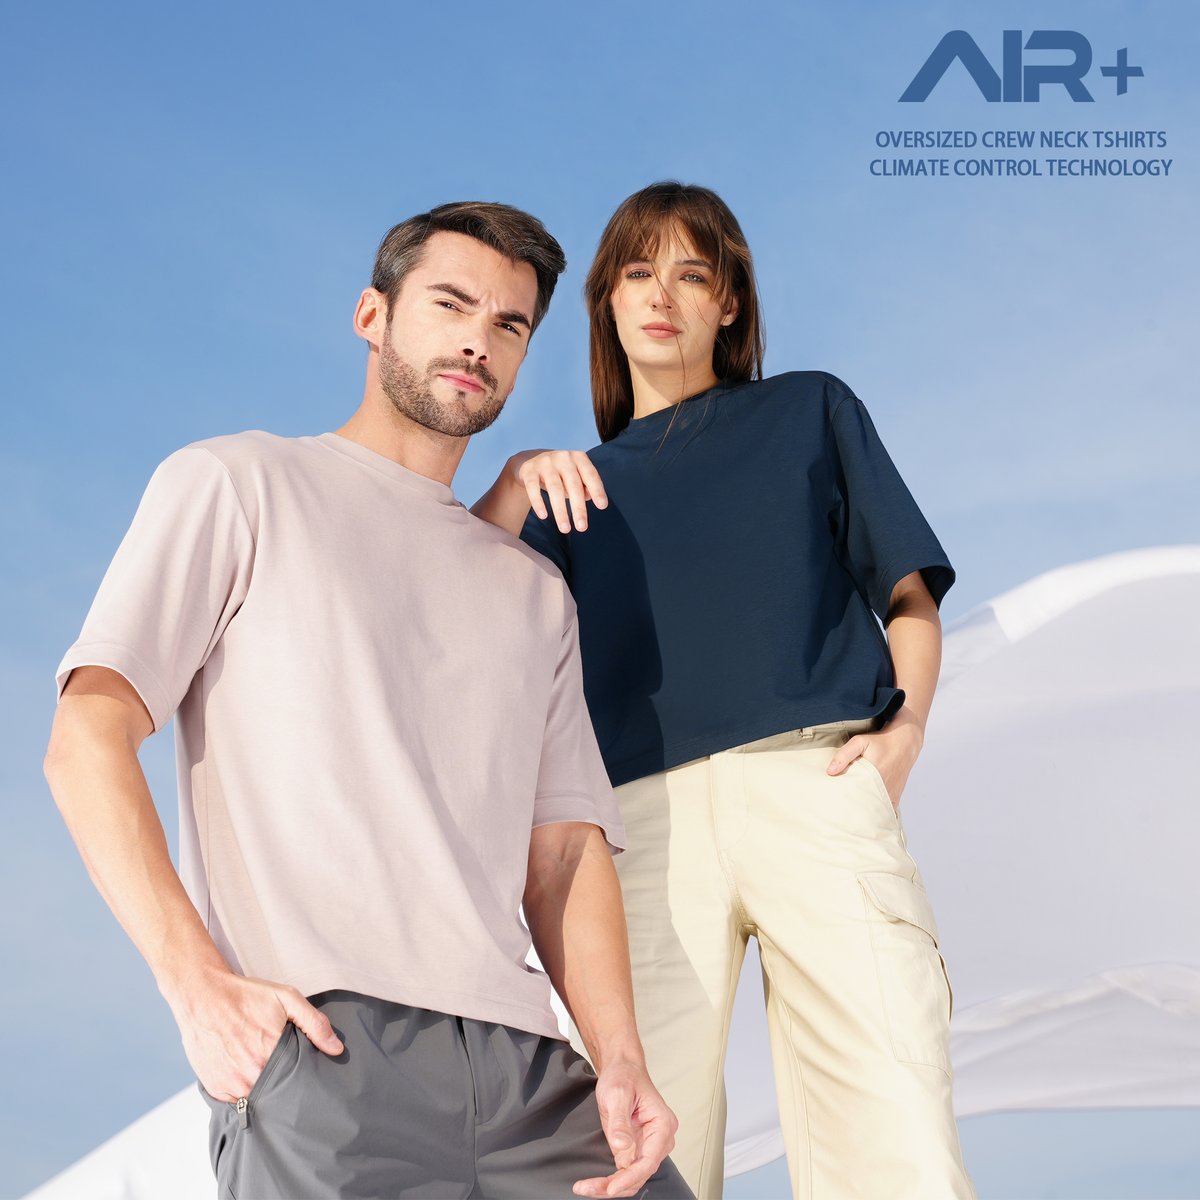 Experience the next level of comfort and style with our AIR+ Oversized T-shirts. Featuring innovative climate control technology, these tees are Quick Dry, Anti-Microbial and showcase a sleek Mirror Finish. . . . . #OversizedTees #SummerFashion #FashionTrends #WomensFashion